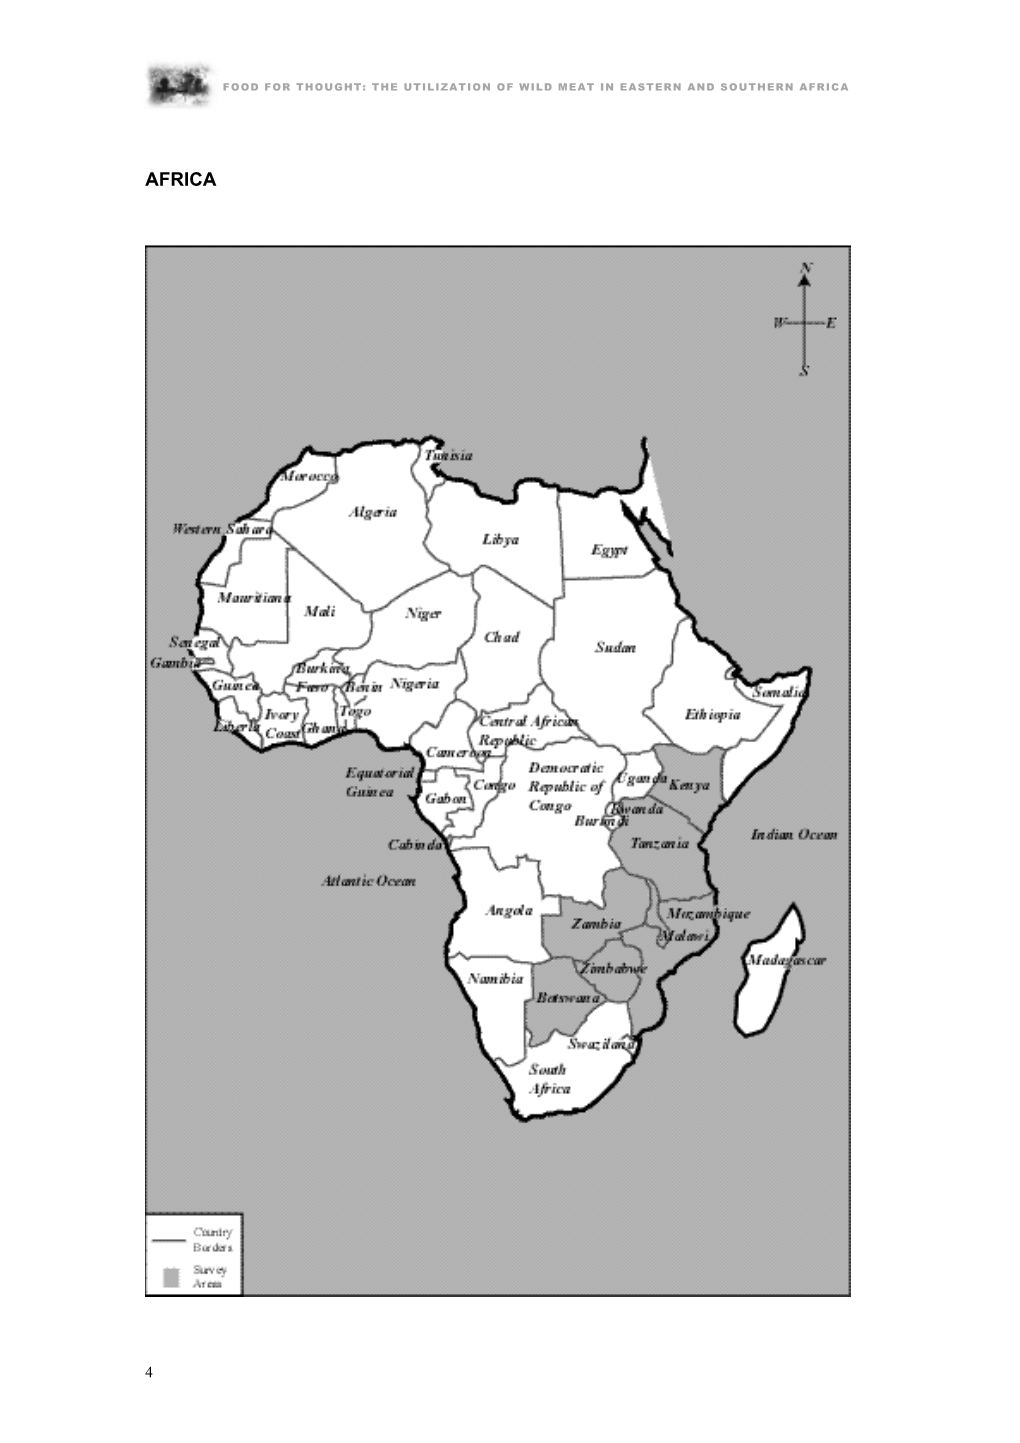 Food for Thought: the Utilization of Wild Meat in E. & S. Africa (PDF